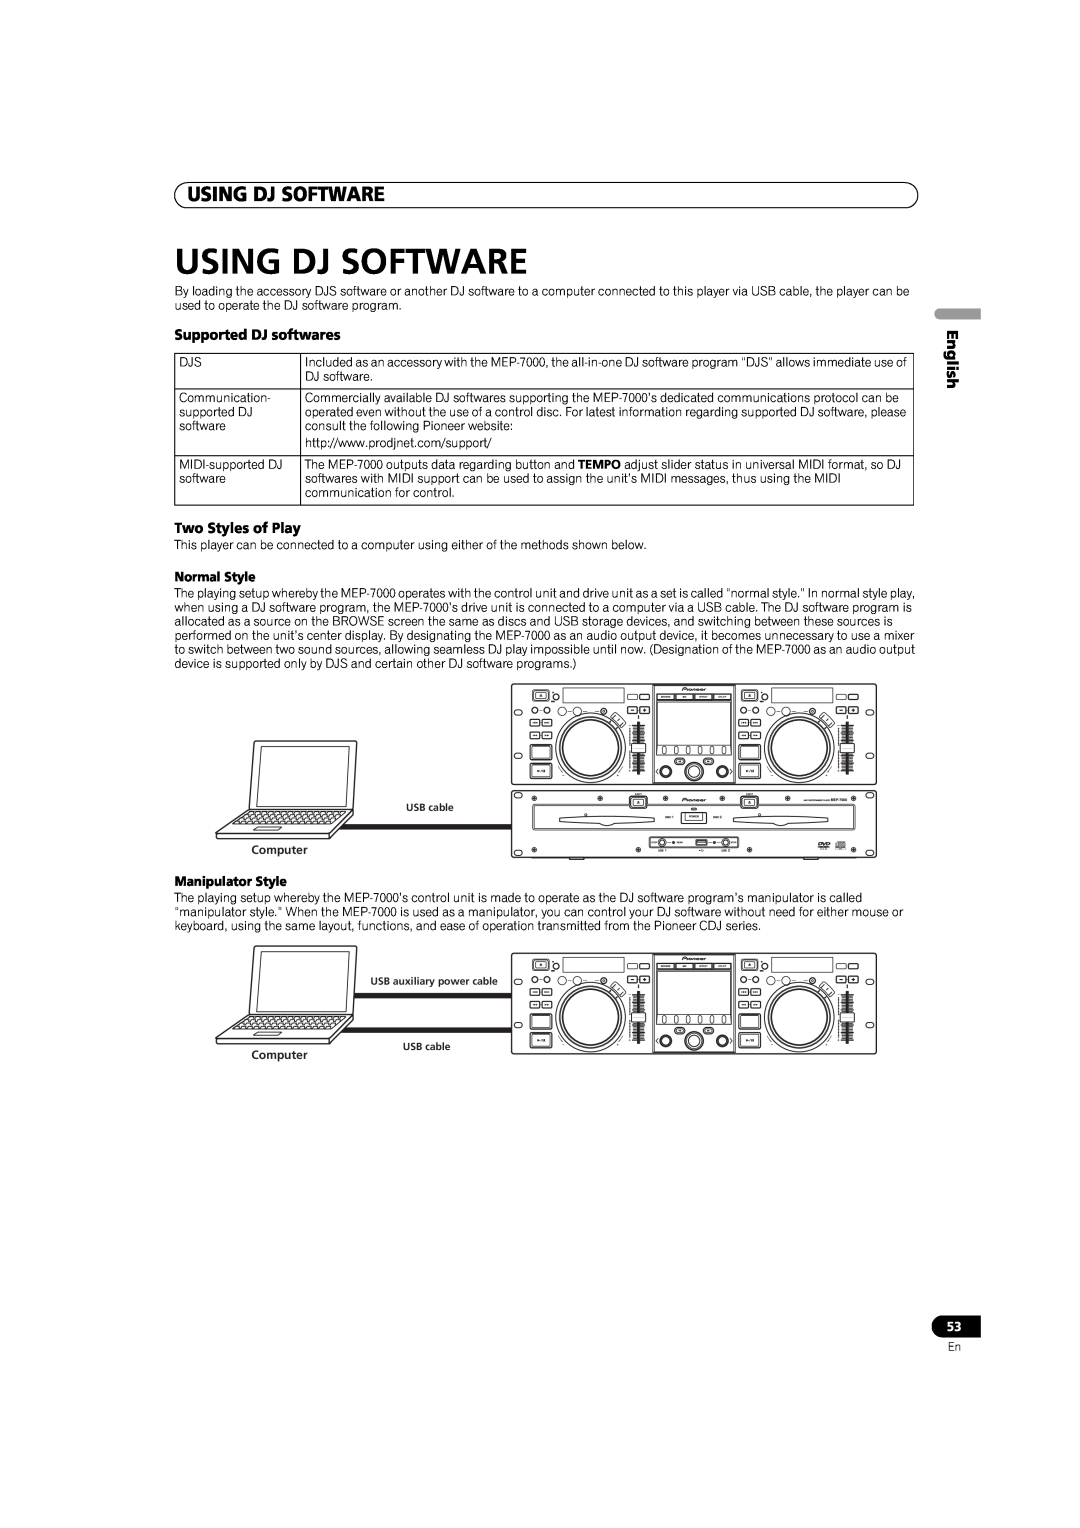 Pioneer MEP-7000 operating instructions Using Dj Software, English, Normal Style, Manipulator Style, Computer 